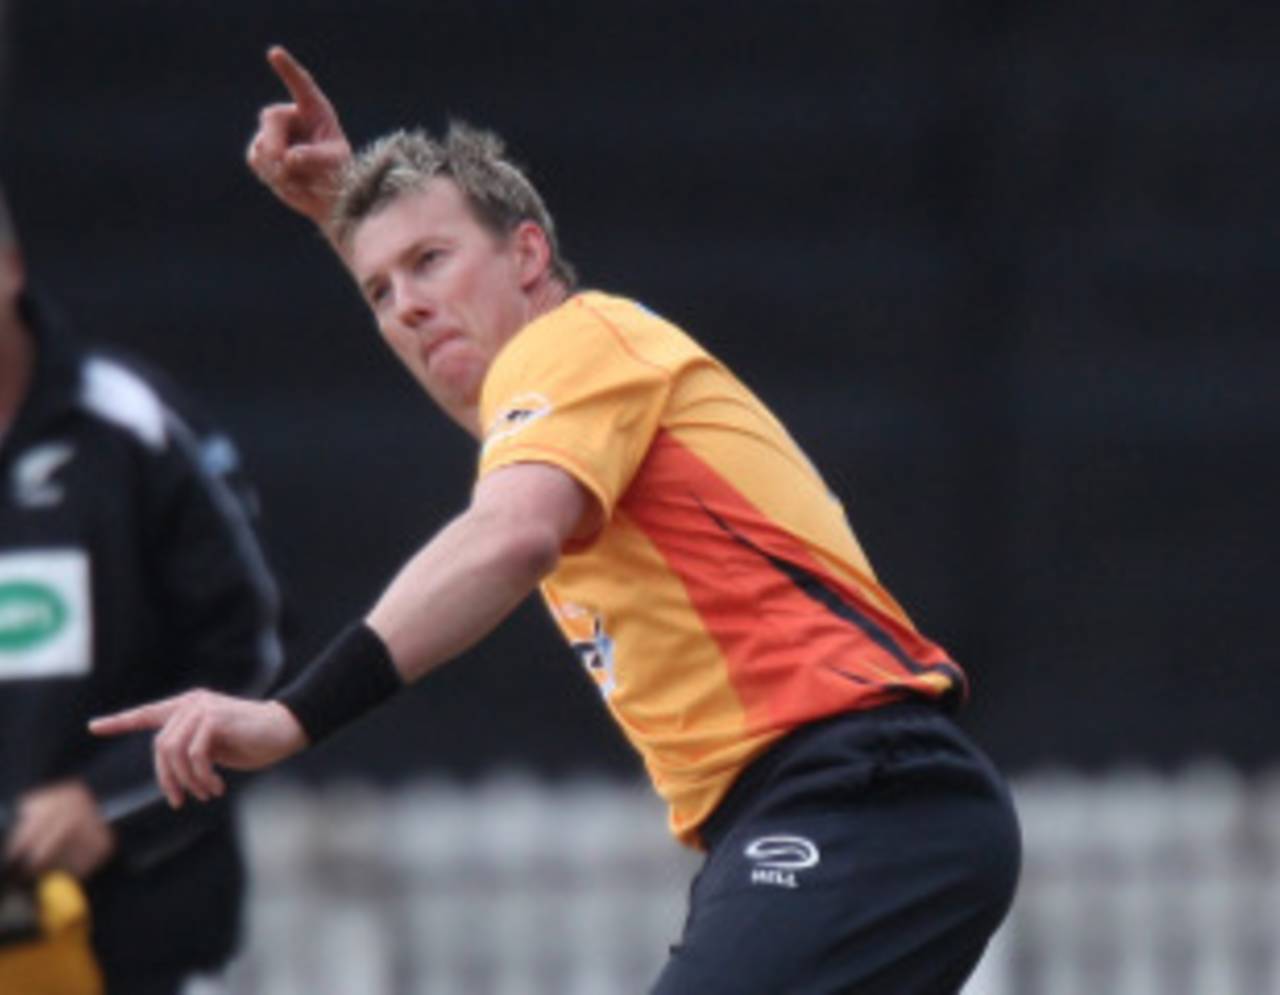 Brett Lee took one wicket but was smashed for 33 runs in three overs, Wellington v Auckland, HRV Cup, Wellington, December 14, 2010 